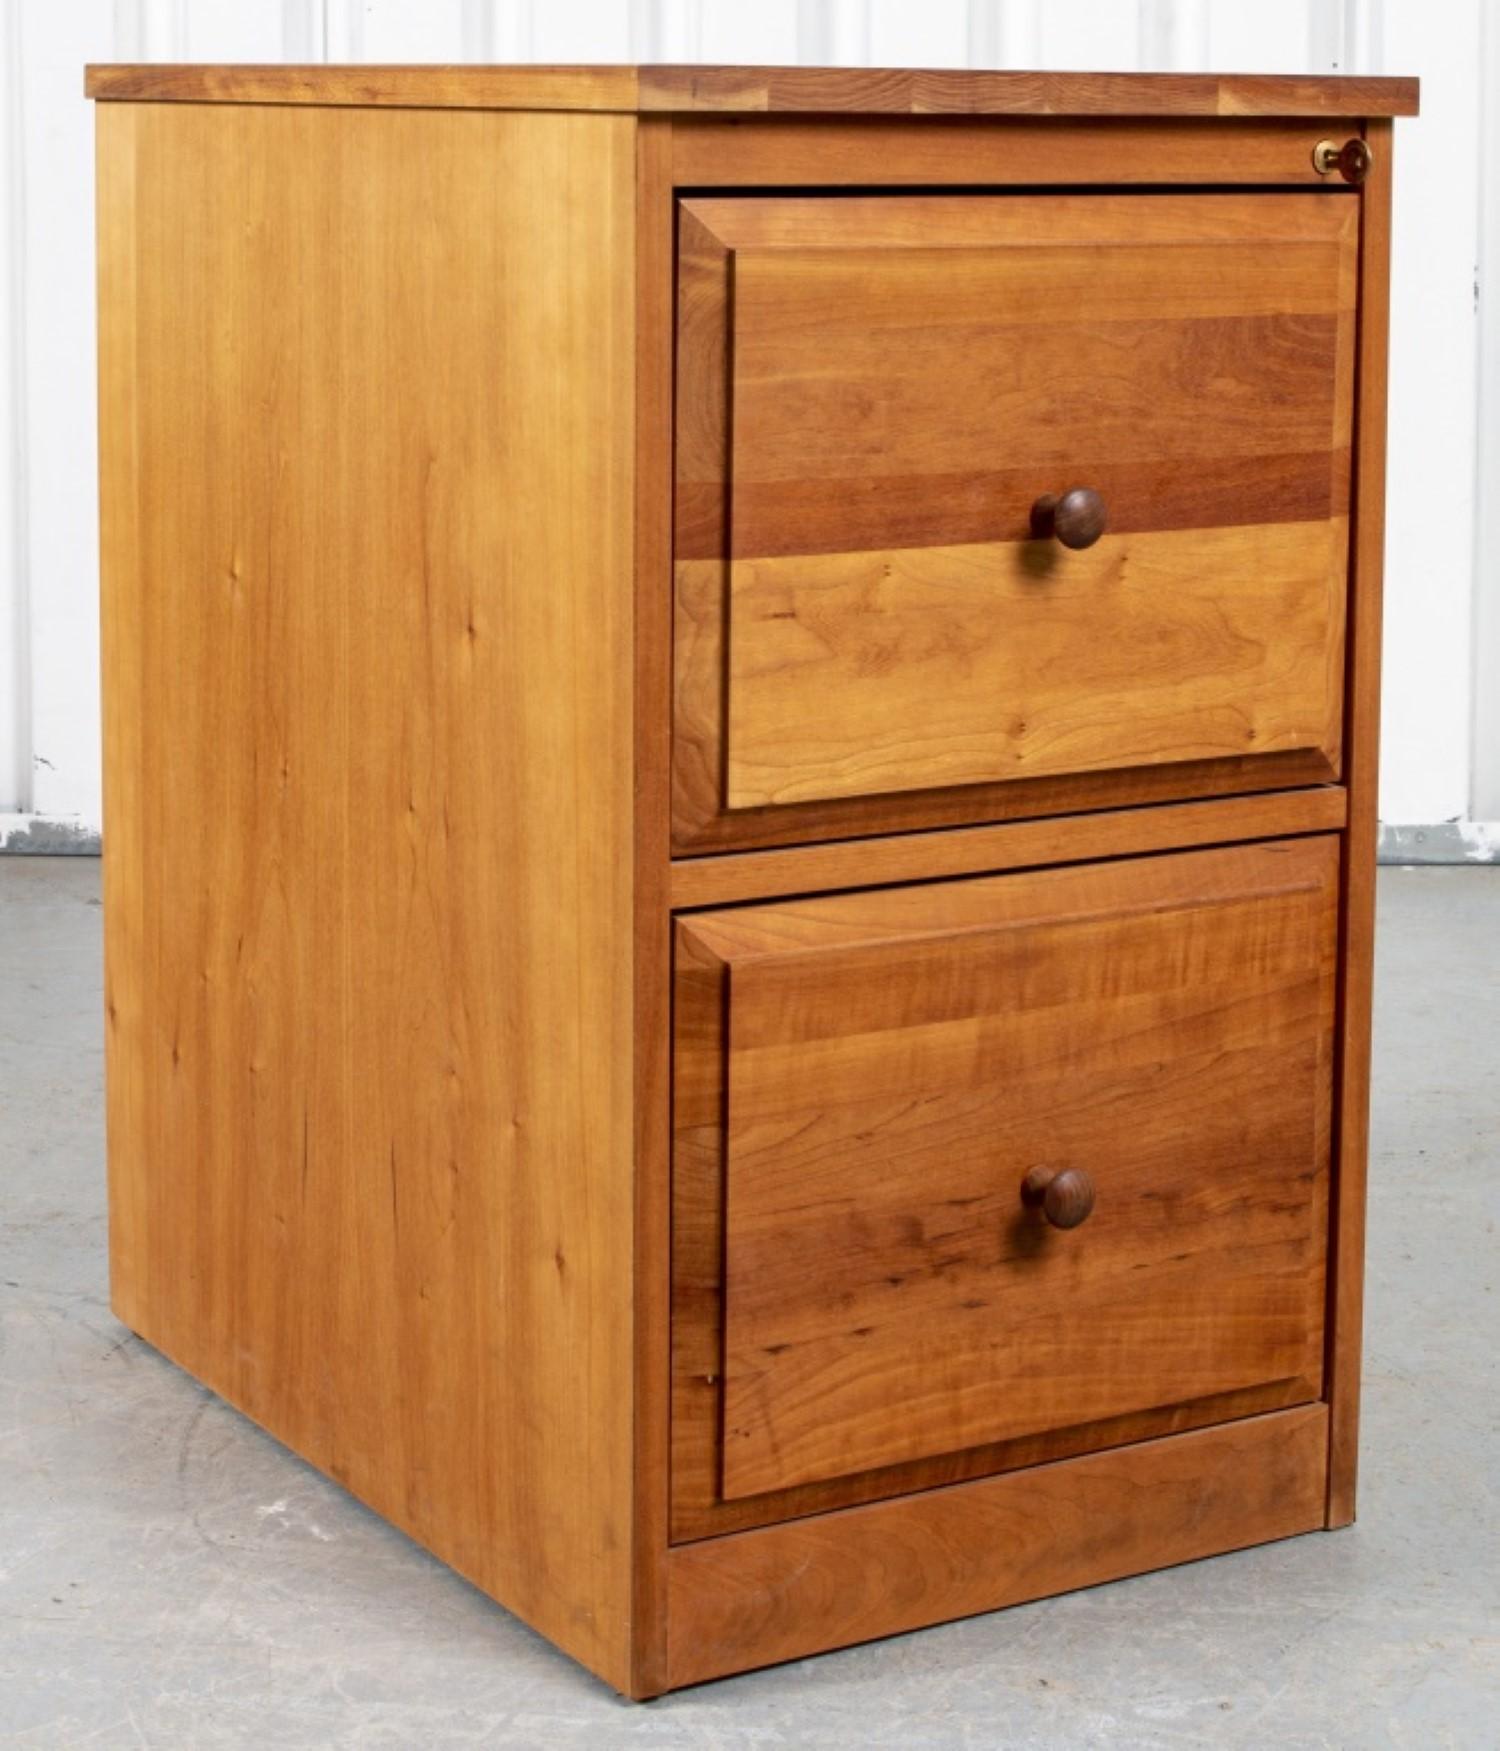 his vintage oak two drawer file cabinet is a stylish and functional storage solution for your home or office. It features two spacious drawers with metal pulls, perfect for storing important documents and files. The cabinet is made of solid oak wood